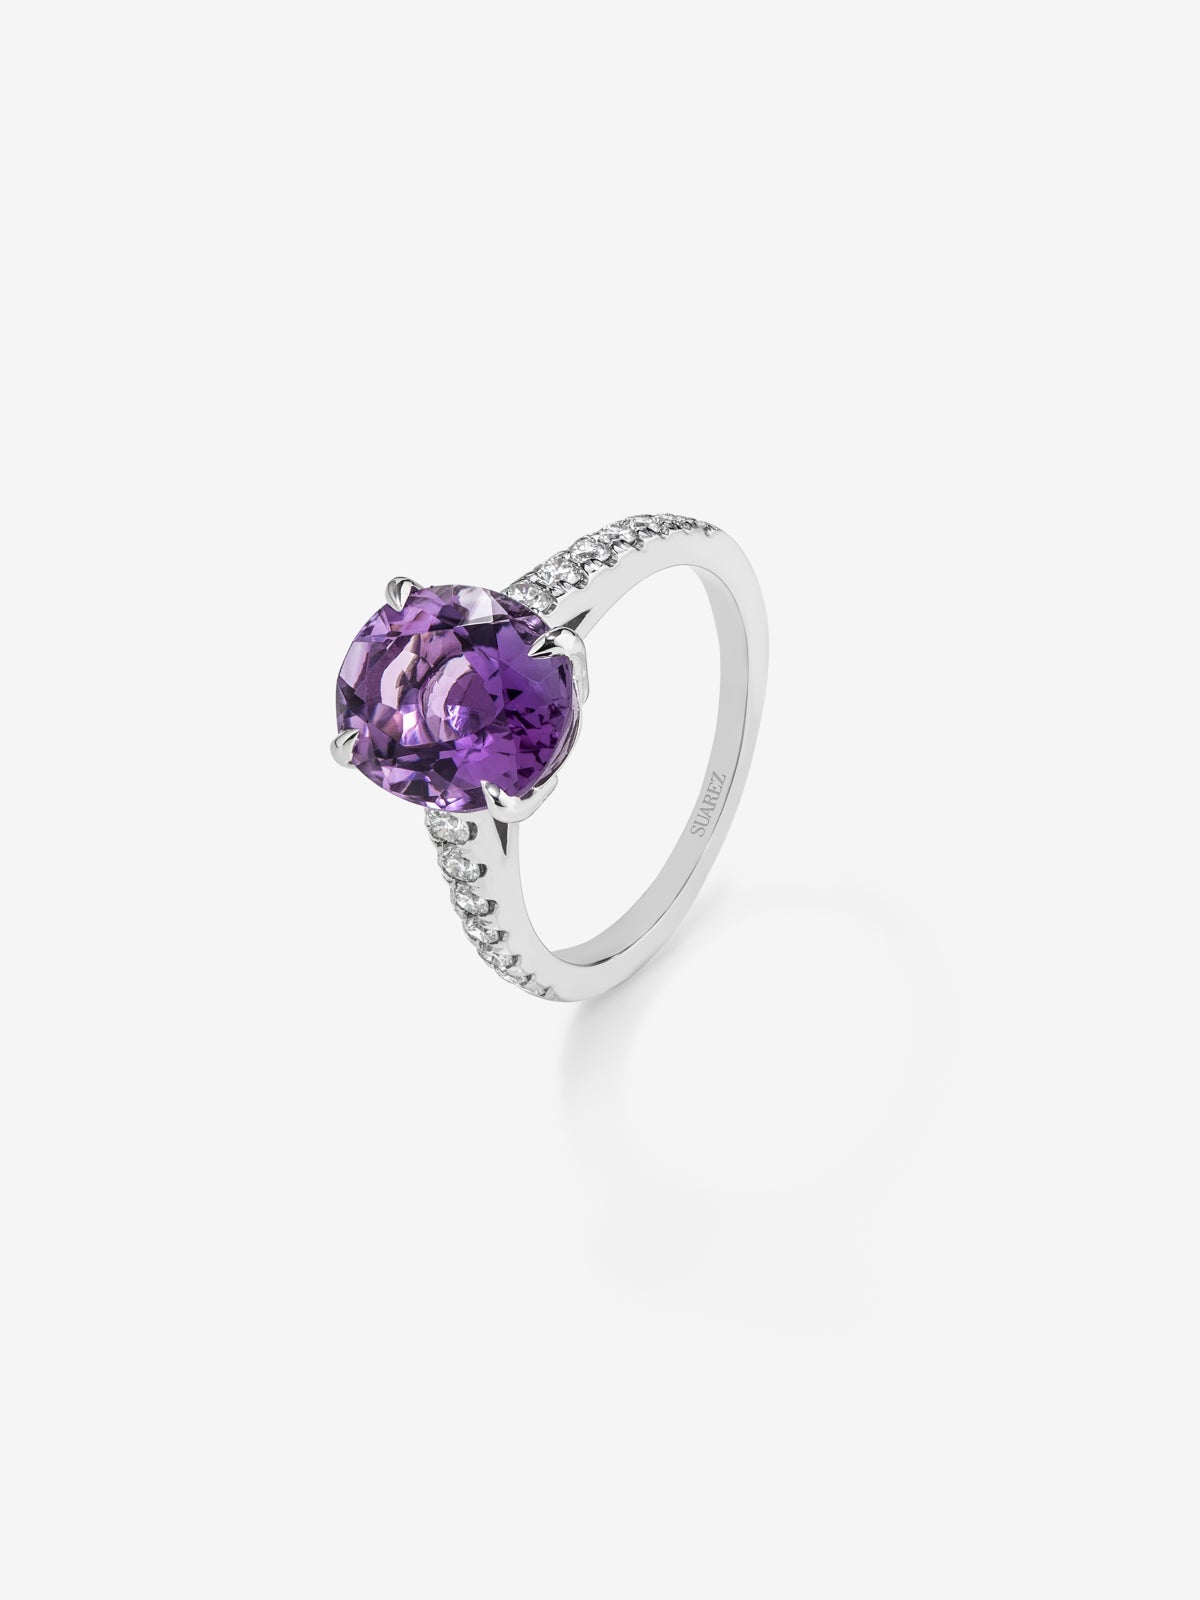 18K white gold ring with oval-cut purple amethyst of 4.35 cts and 12 brilliant-cut diamonds with a total of 0.29 cts